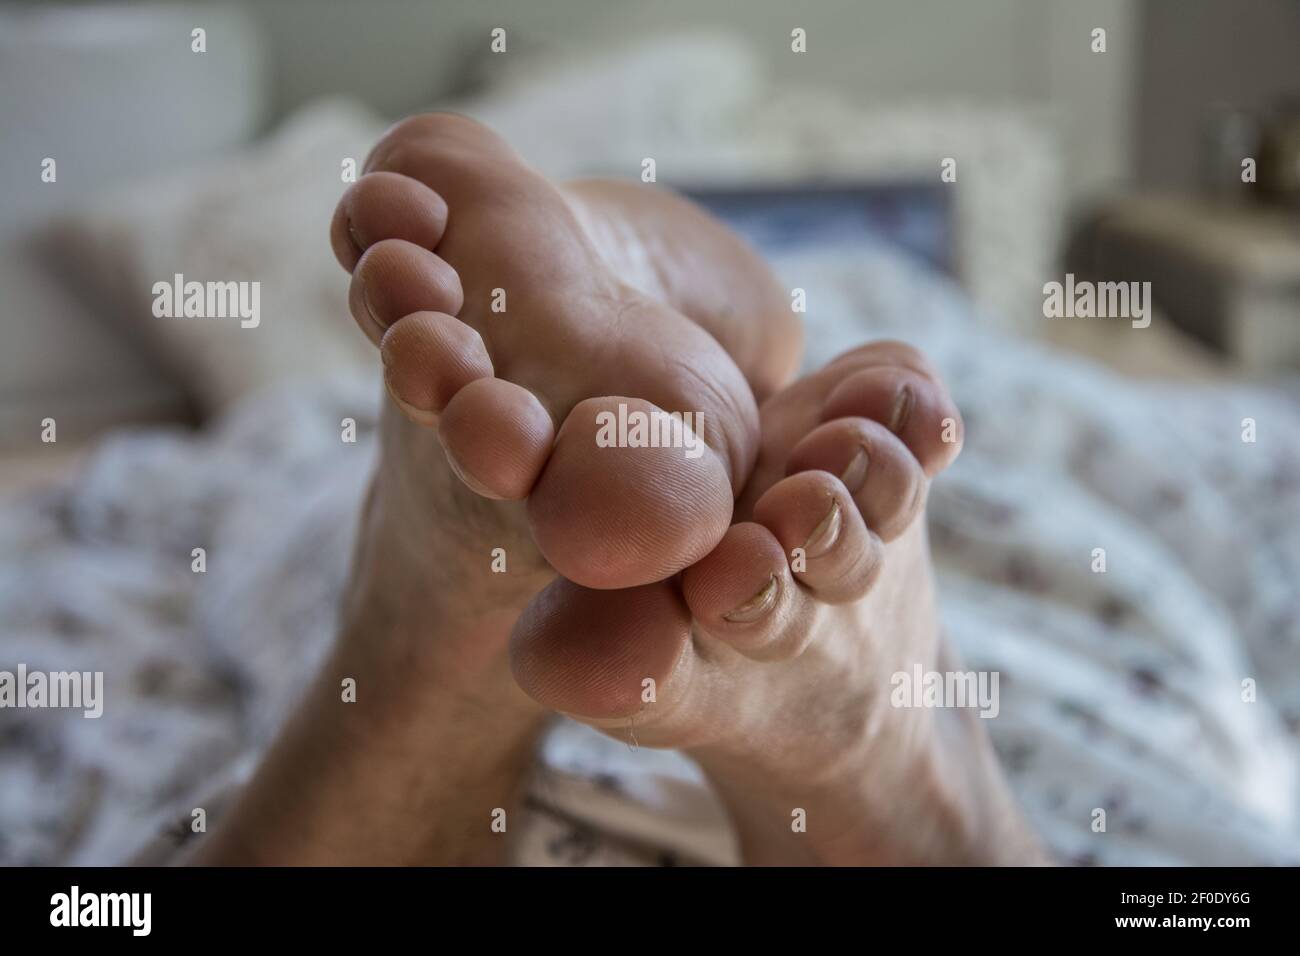 Man in bed with laptop focus on feet Stock Photo